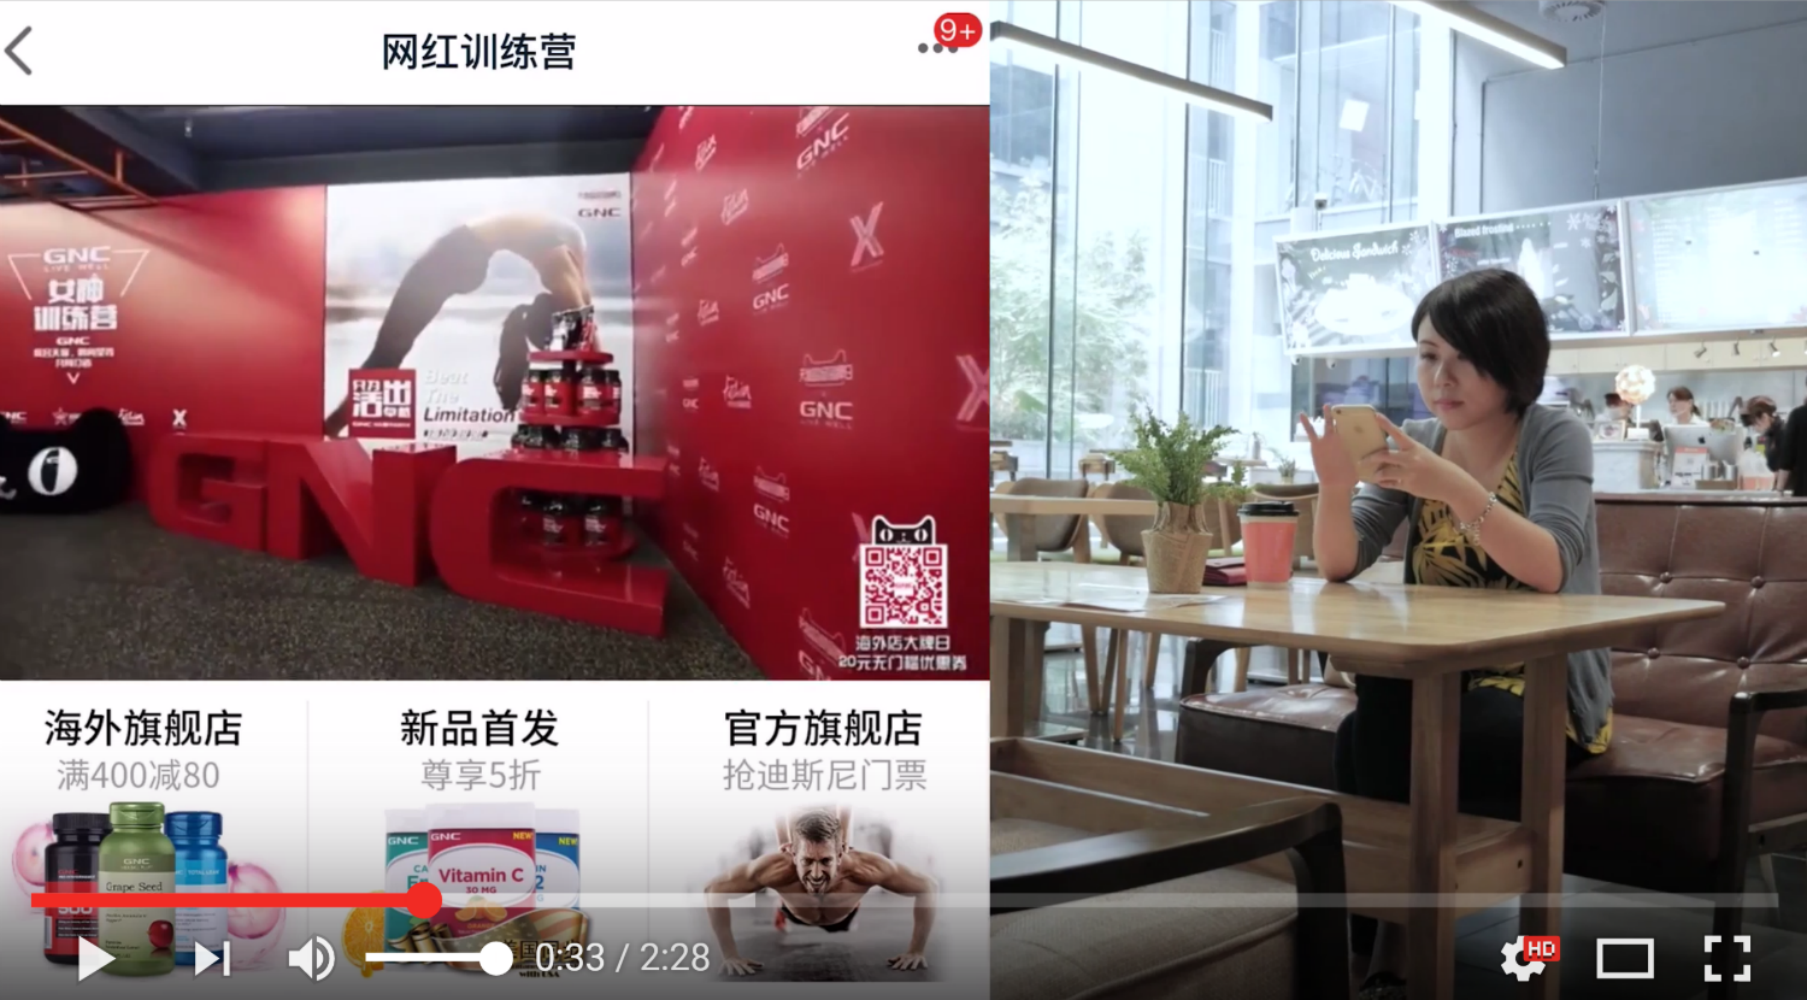 A screenshot of a video highlighting Tmall's live stream events directed at Chinese consumers.